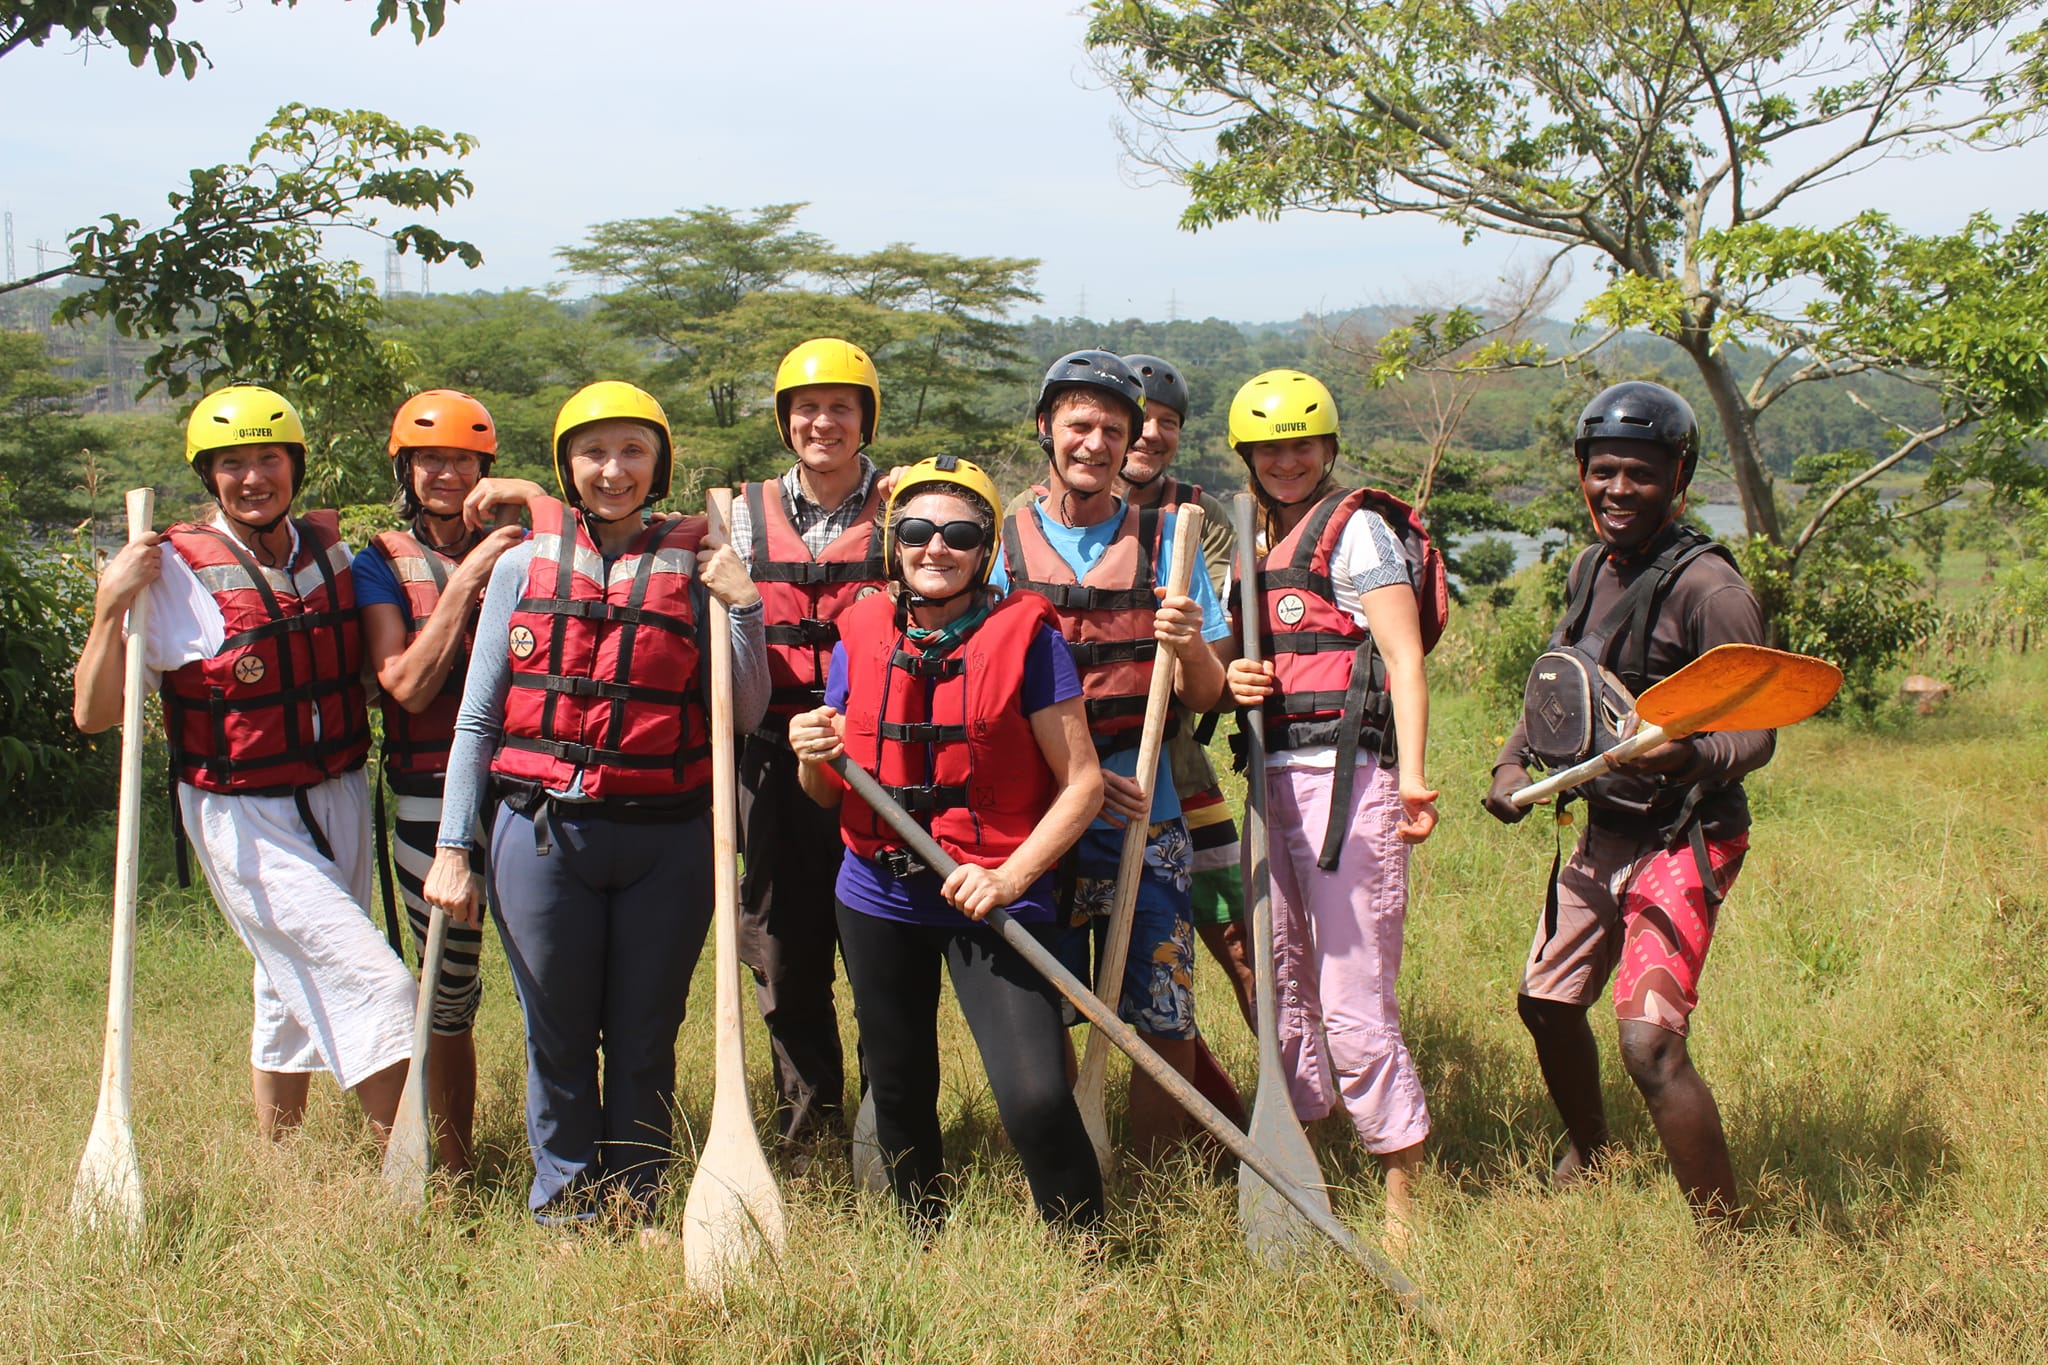 White Water rafting in Jinja with Amakula African Safaz along the Nile and through Jinja given the option to select an easy or difficult route